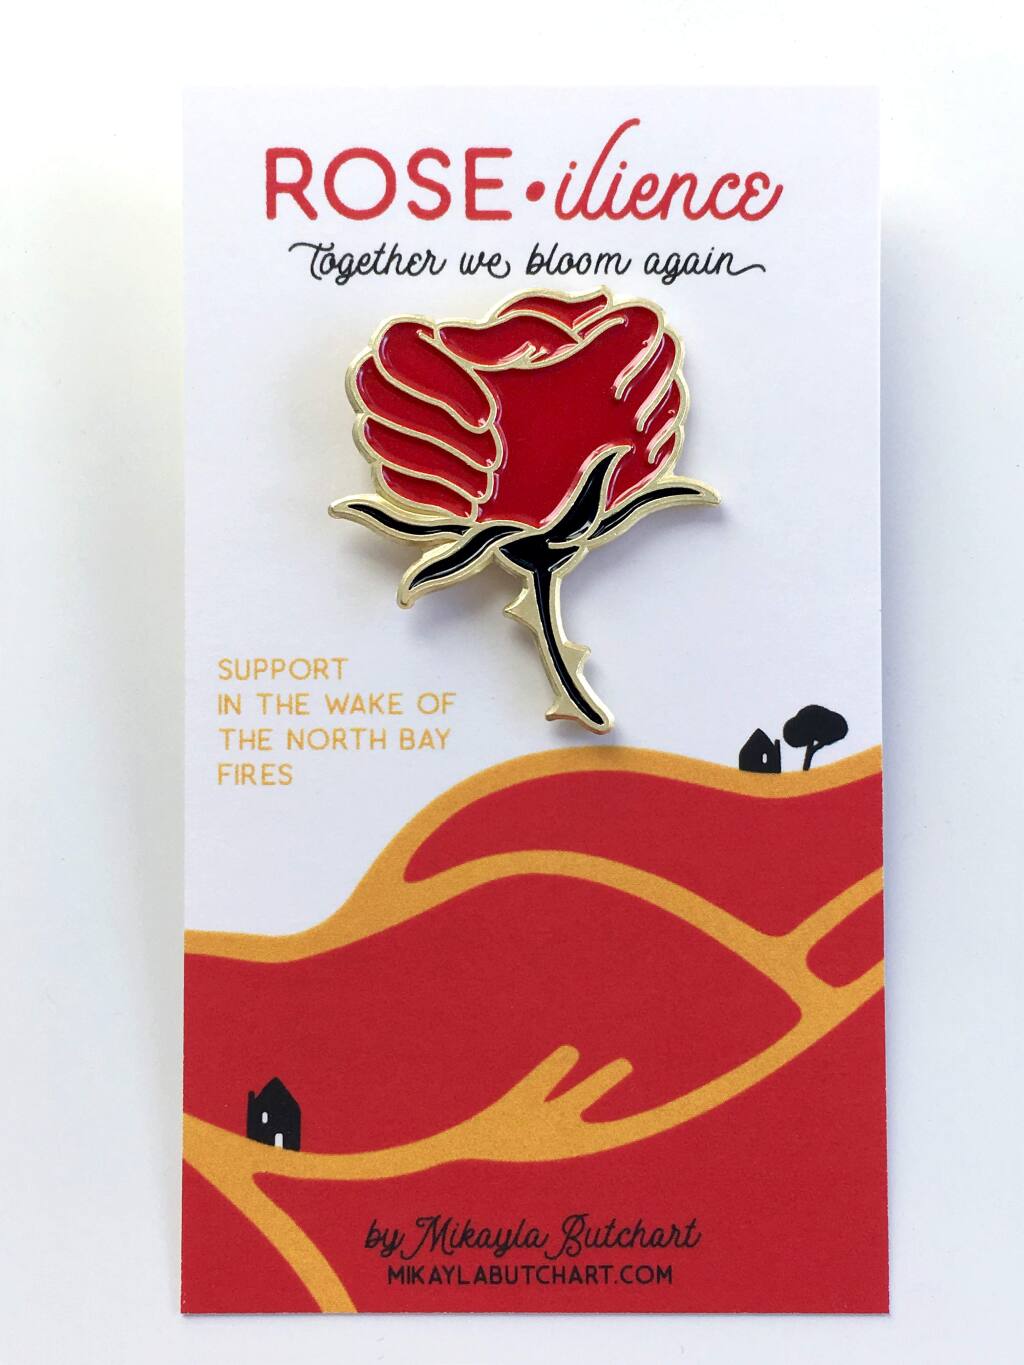 Mikayla Butchart's 'Roseilience' pin, formed by two clasping hands, is a symbol of hope.